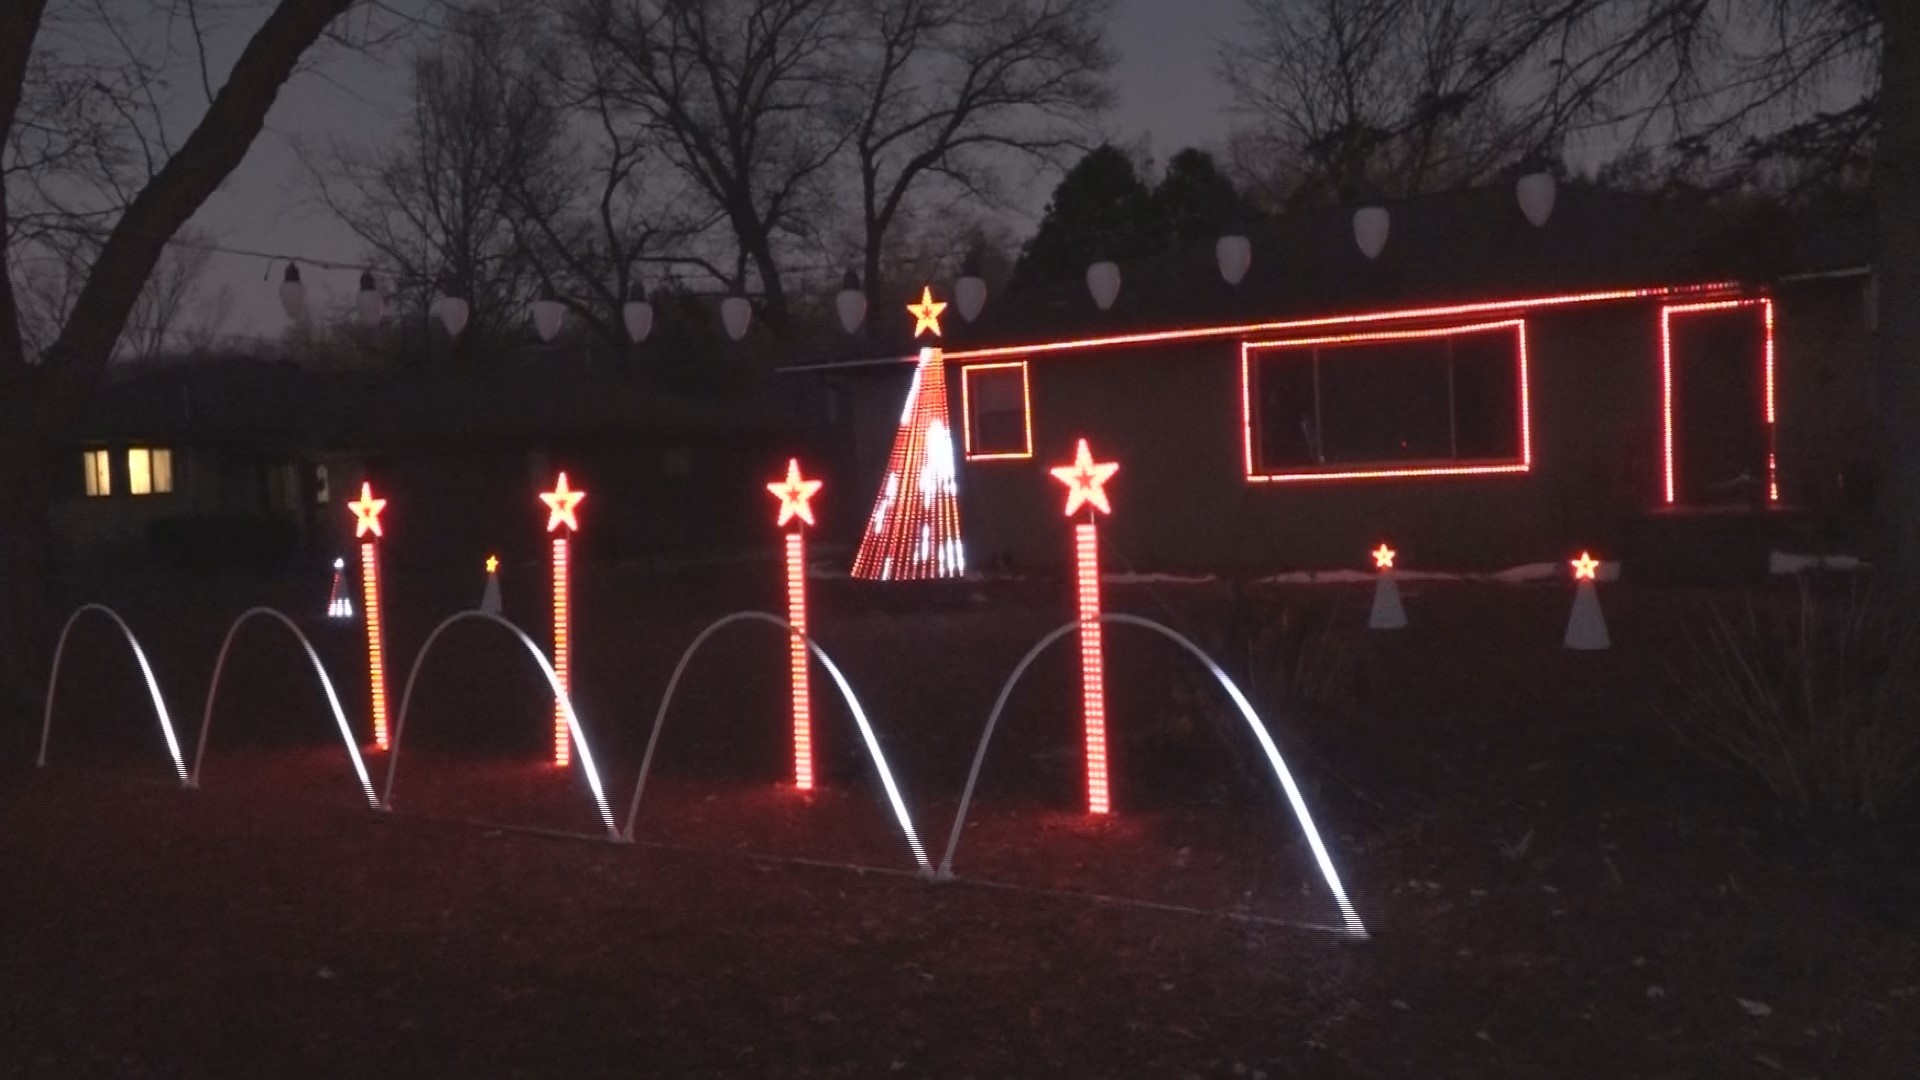 Now that Thanksgiving is over, it's all eyes on Christmas, and light displays are starting to return to West Michigan.